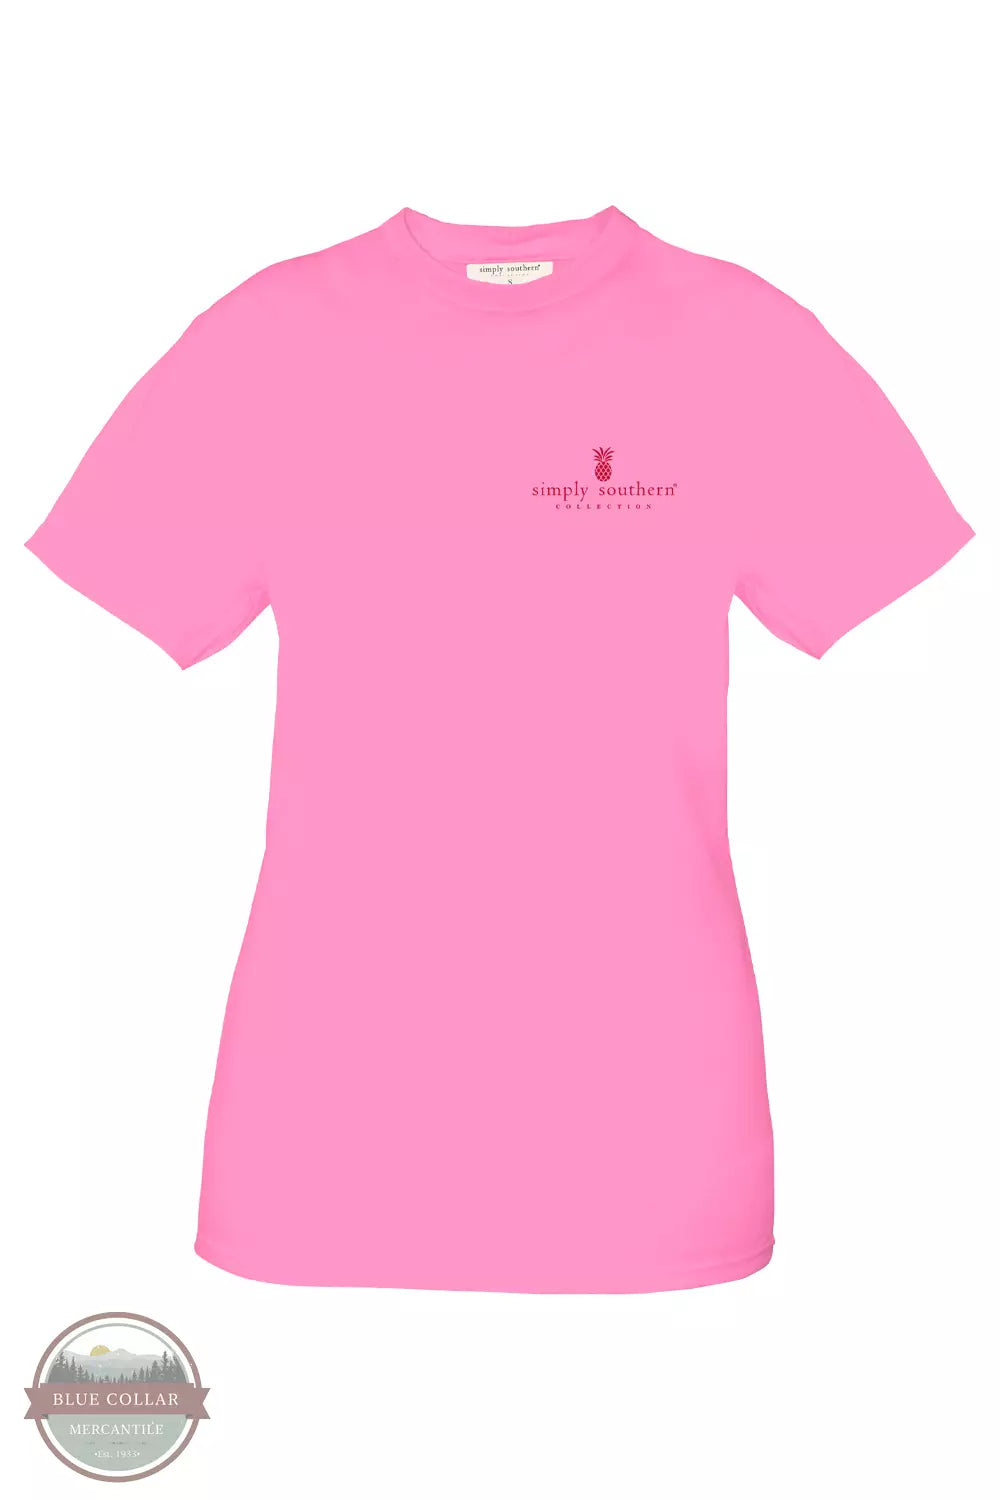 Simply Southern SS-DILL-FNCYCNDY Just Dill With It T-Shirt in Fancy Candy Pink Front View